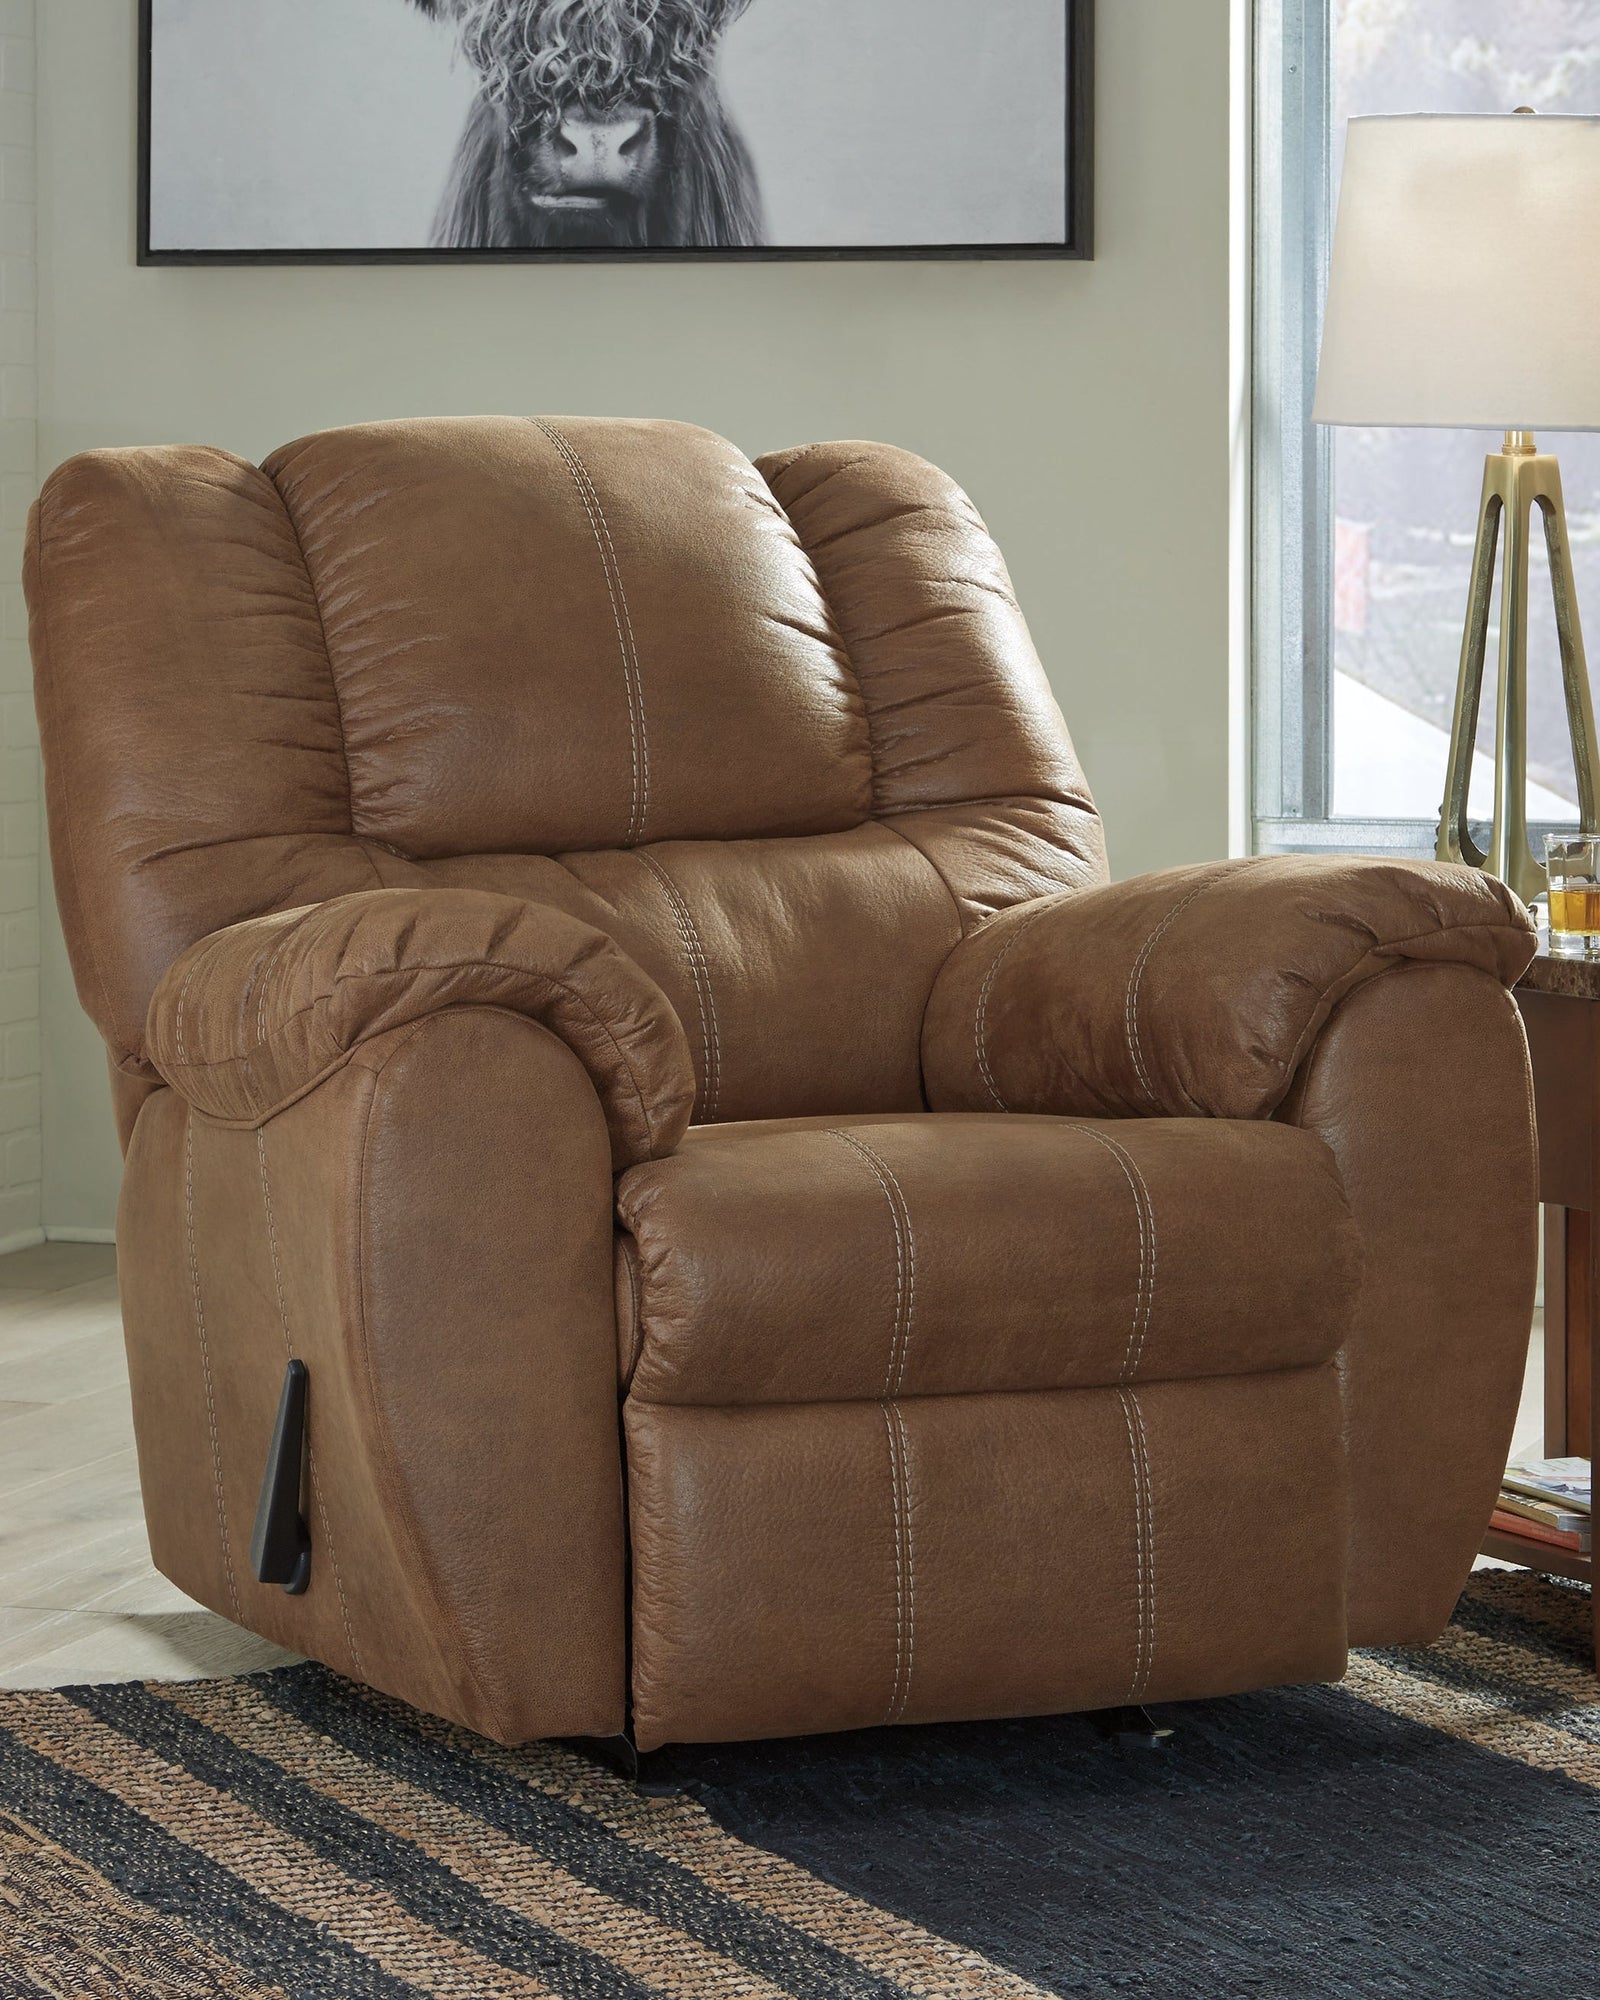 Mcgann Saddle Faux Leather Recliner